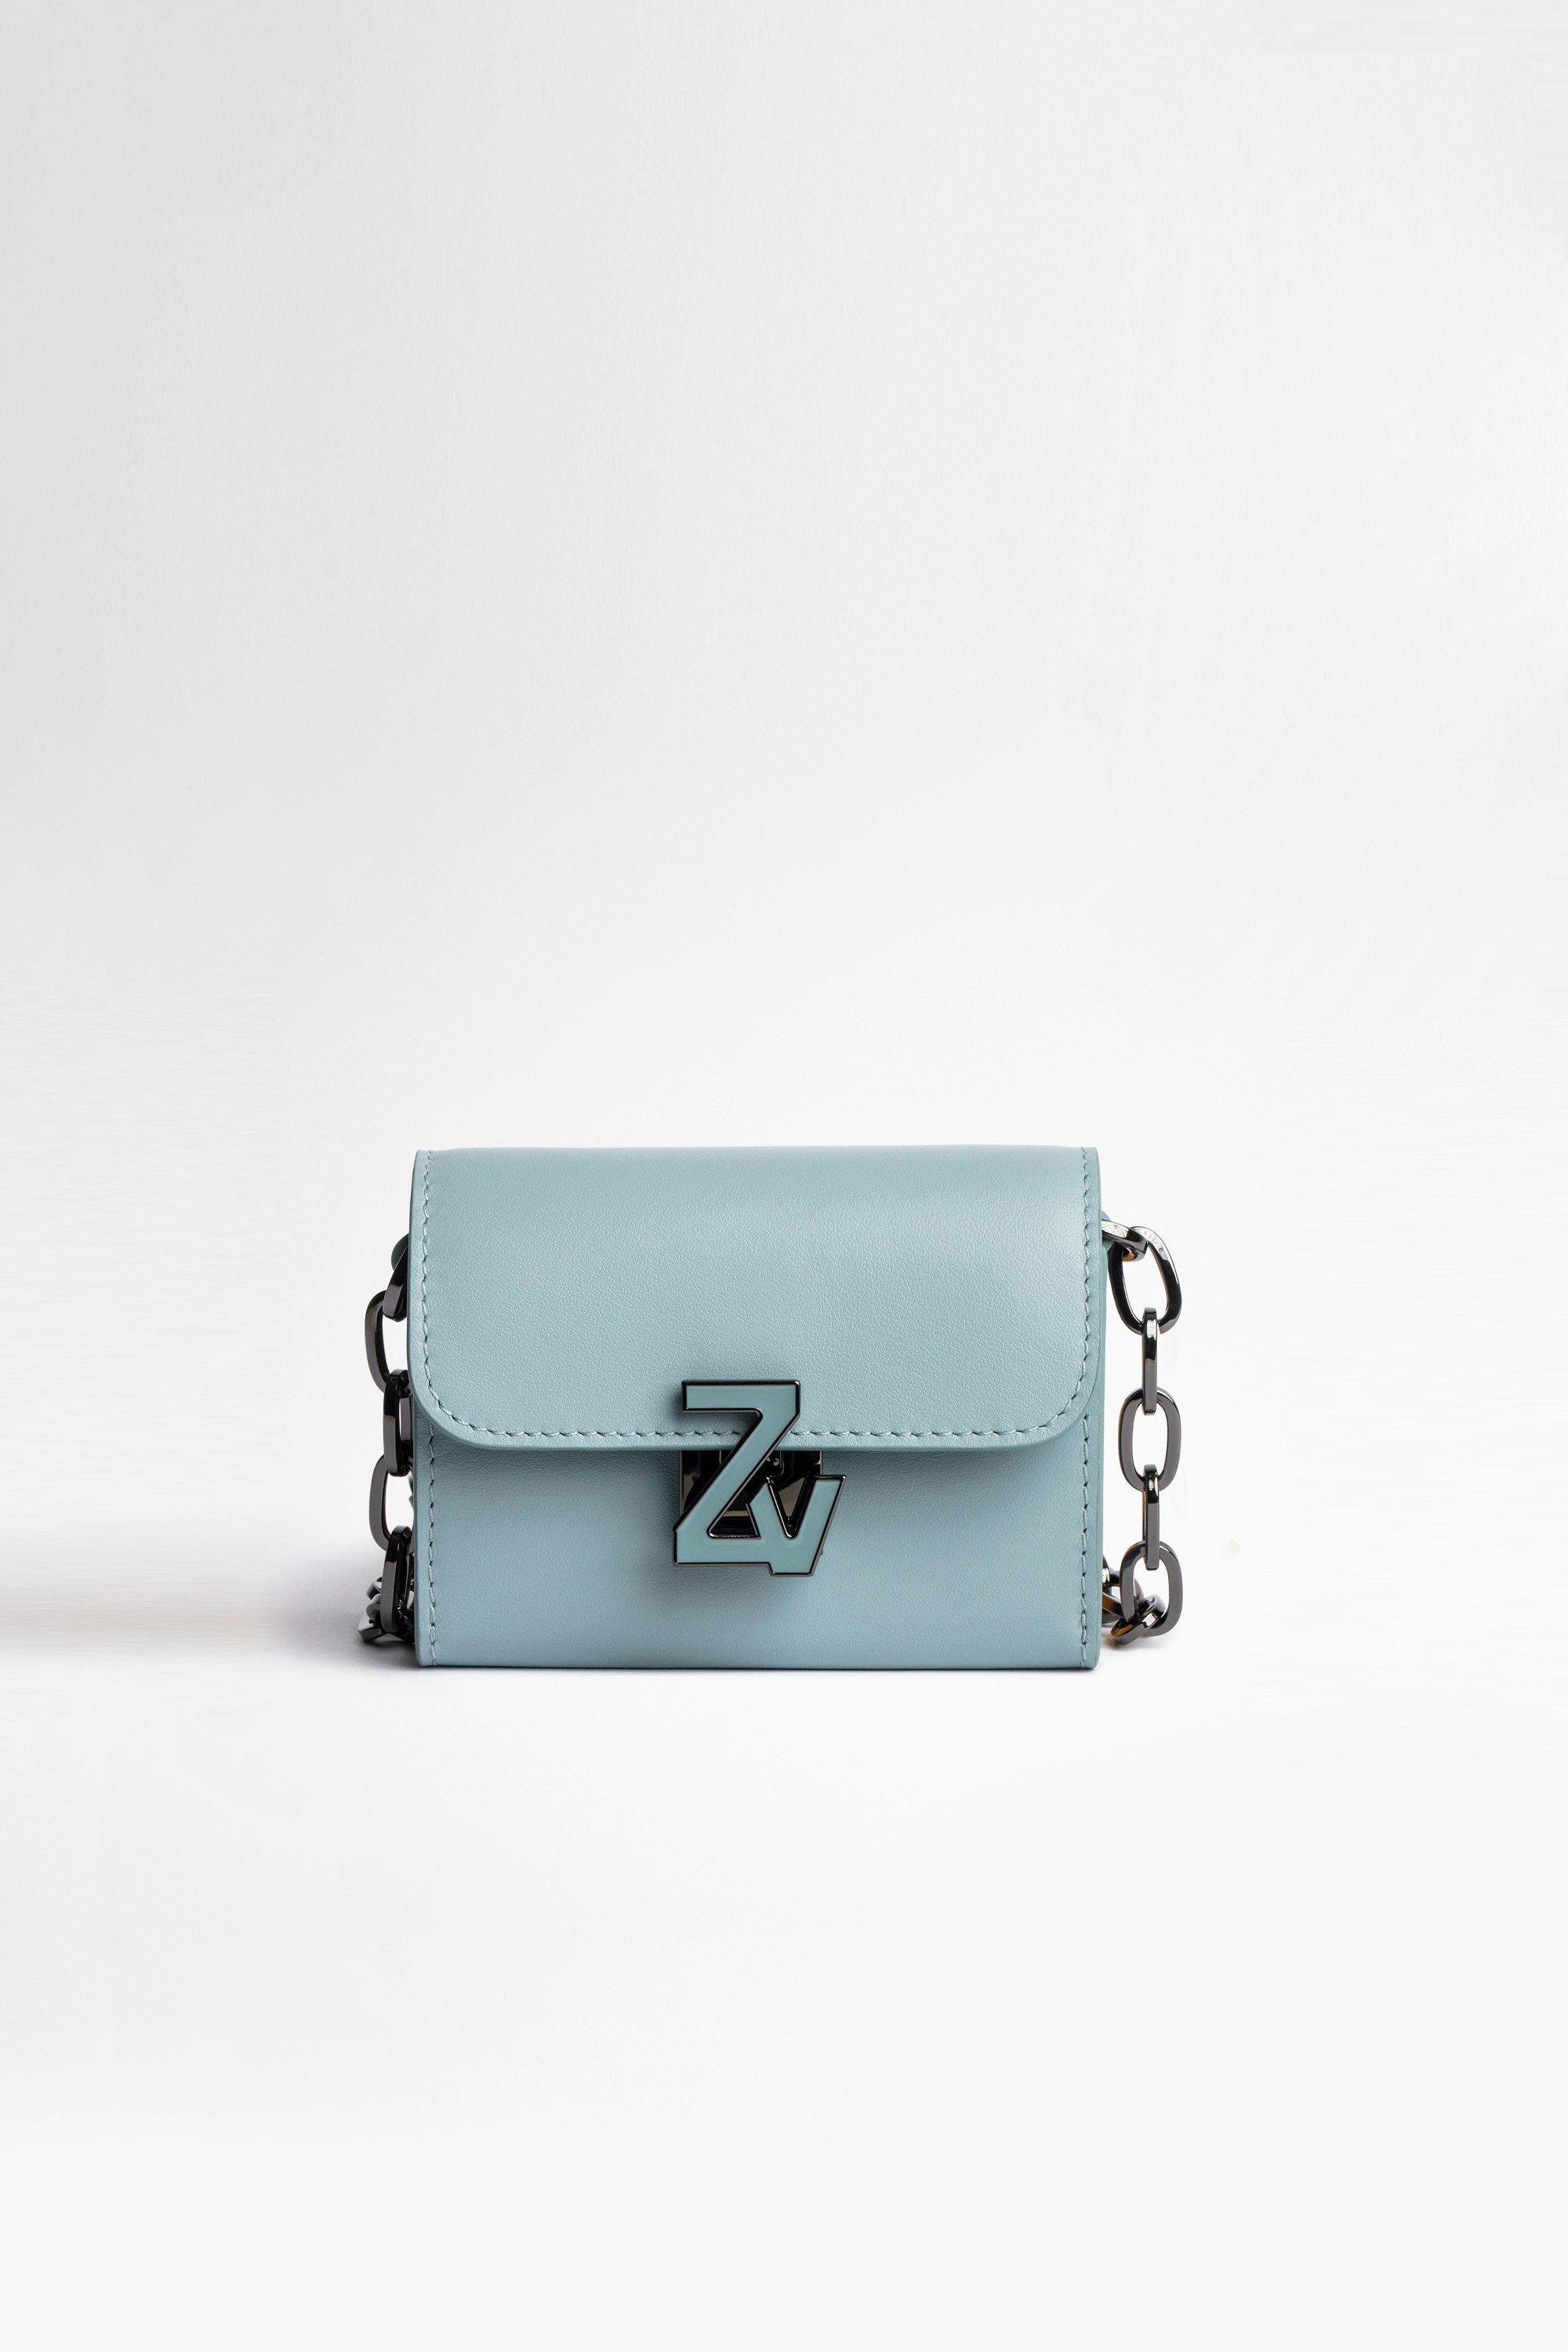 ZV Initiale Le Tiny Unchained Wallet-Style Clutch Women's small leather wallet in sky-blue